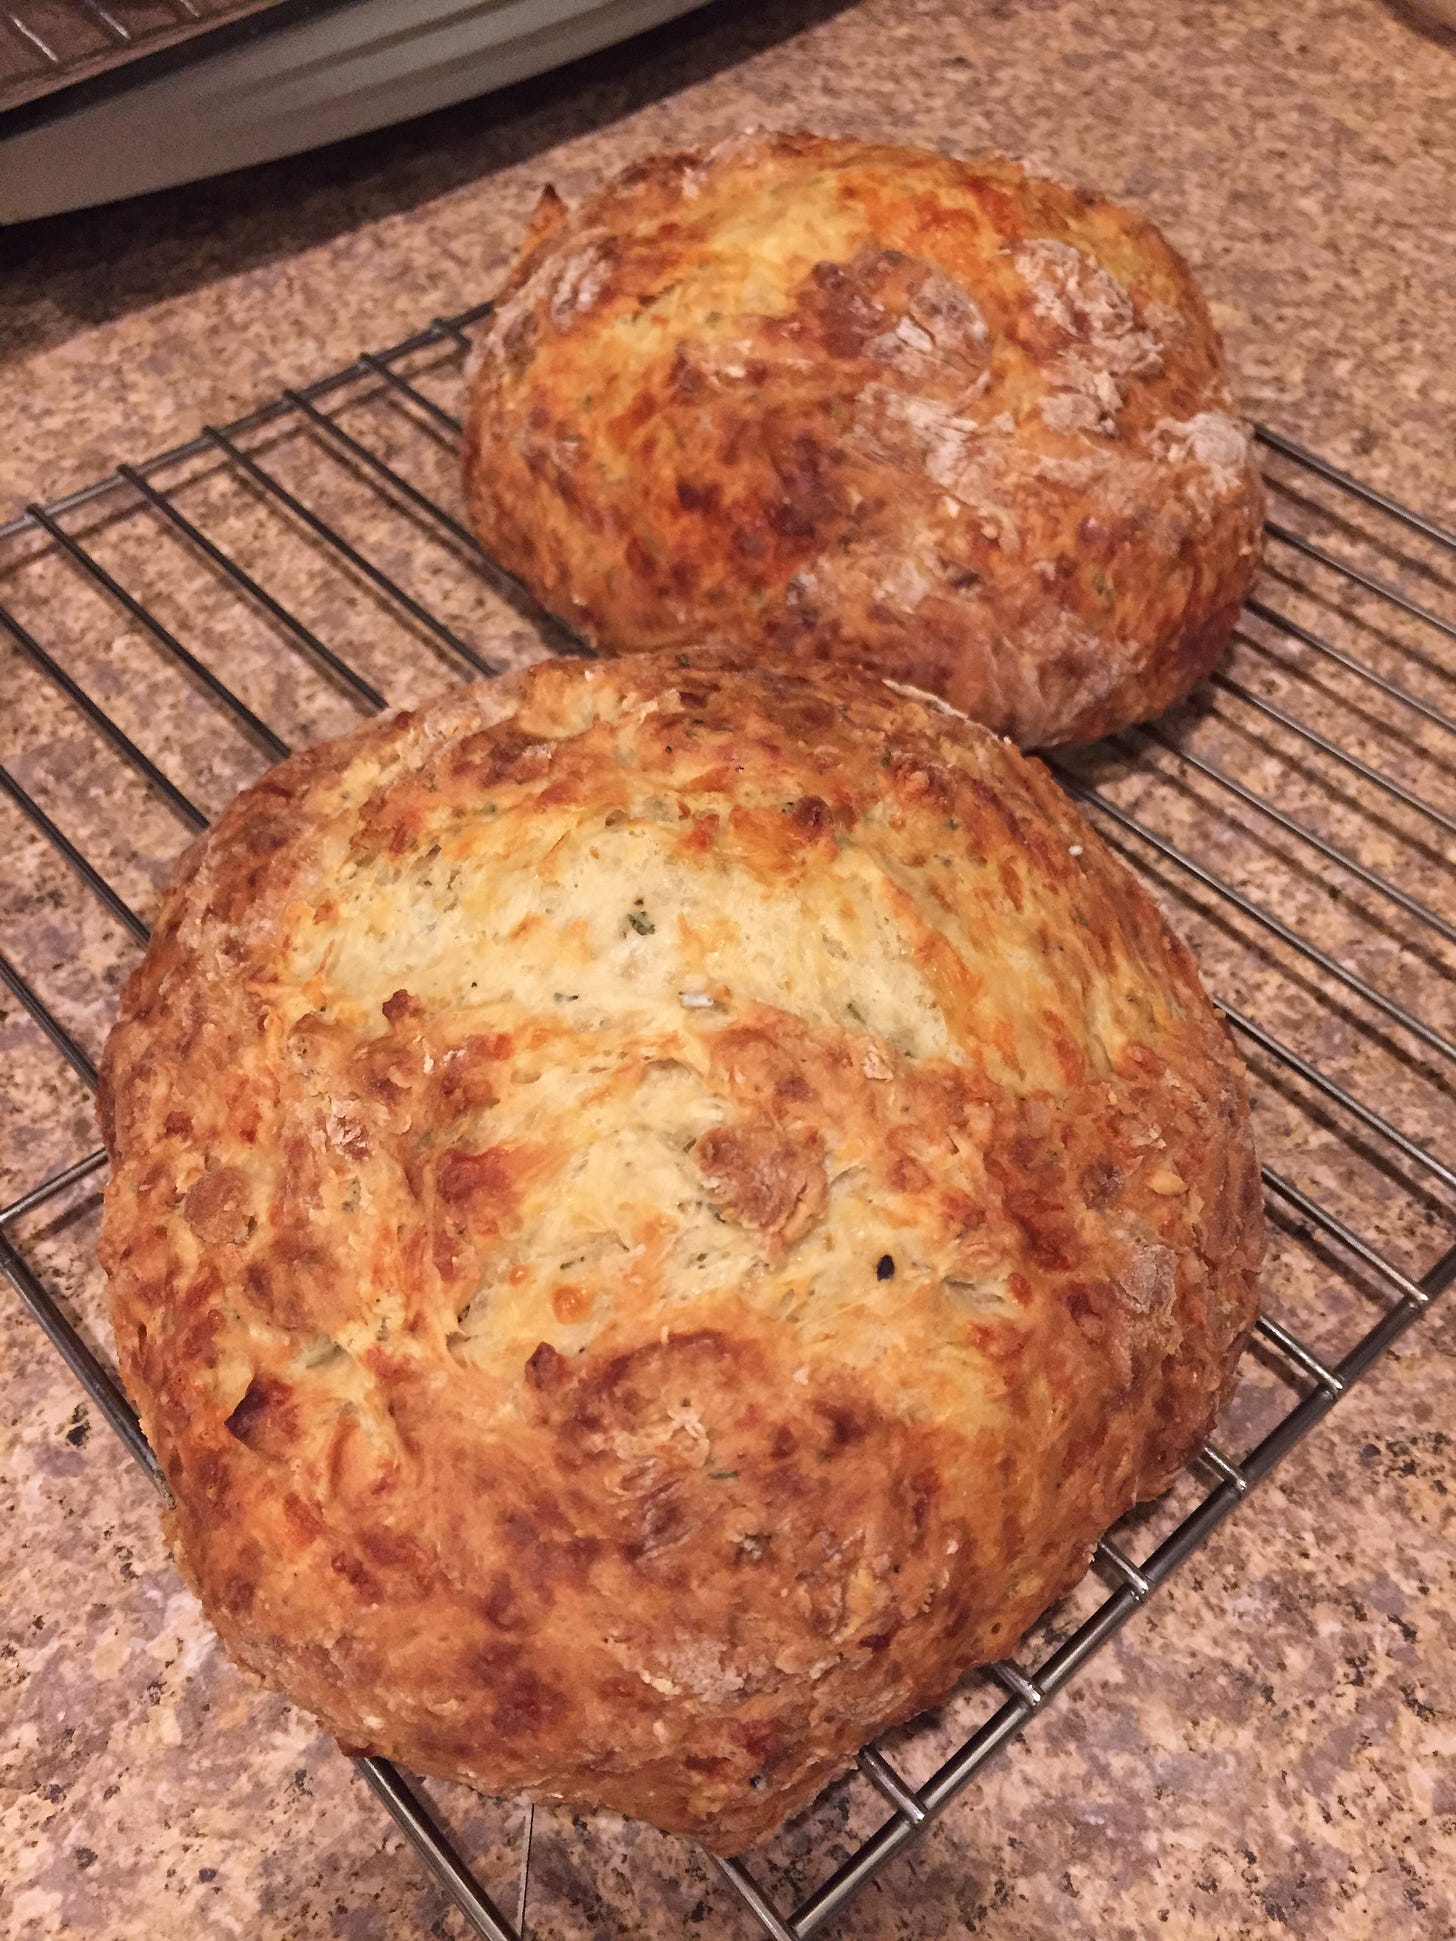 on a cooling rack, two small, round loaves of cheesy soda bread. The outsides are golden brown with a lighter coloured X in the top of each.